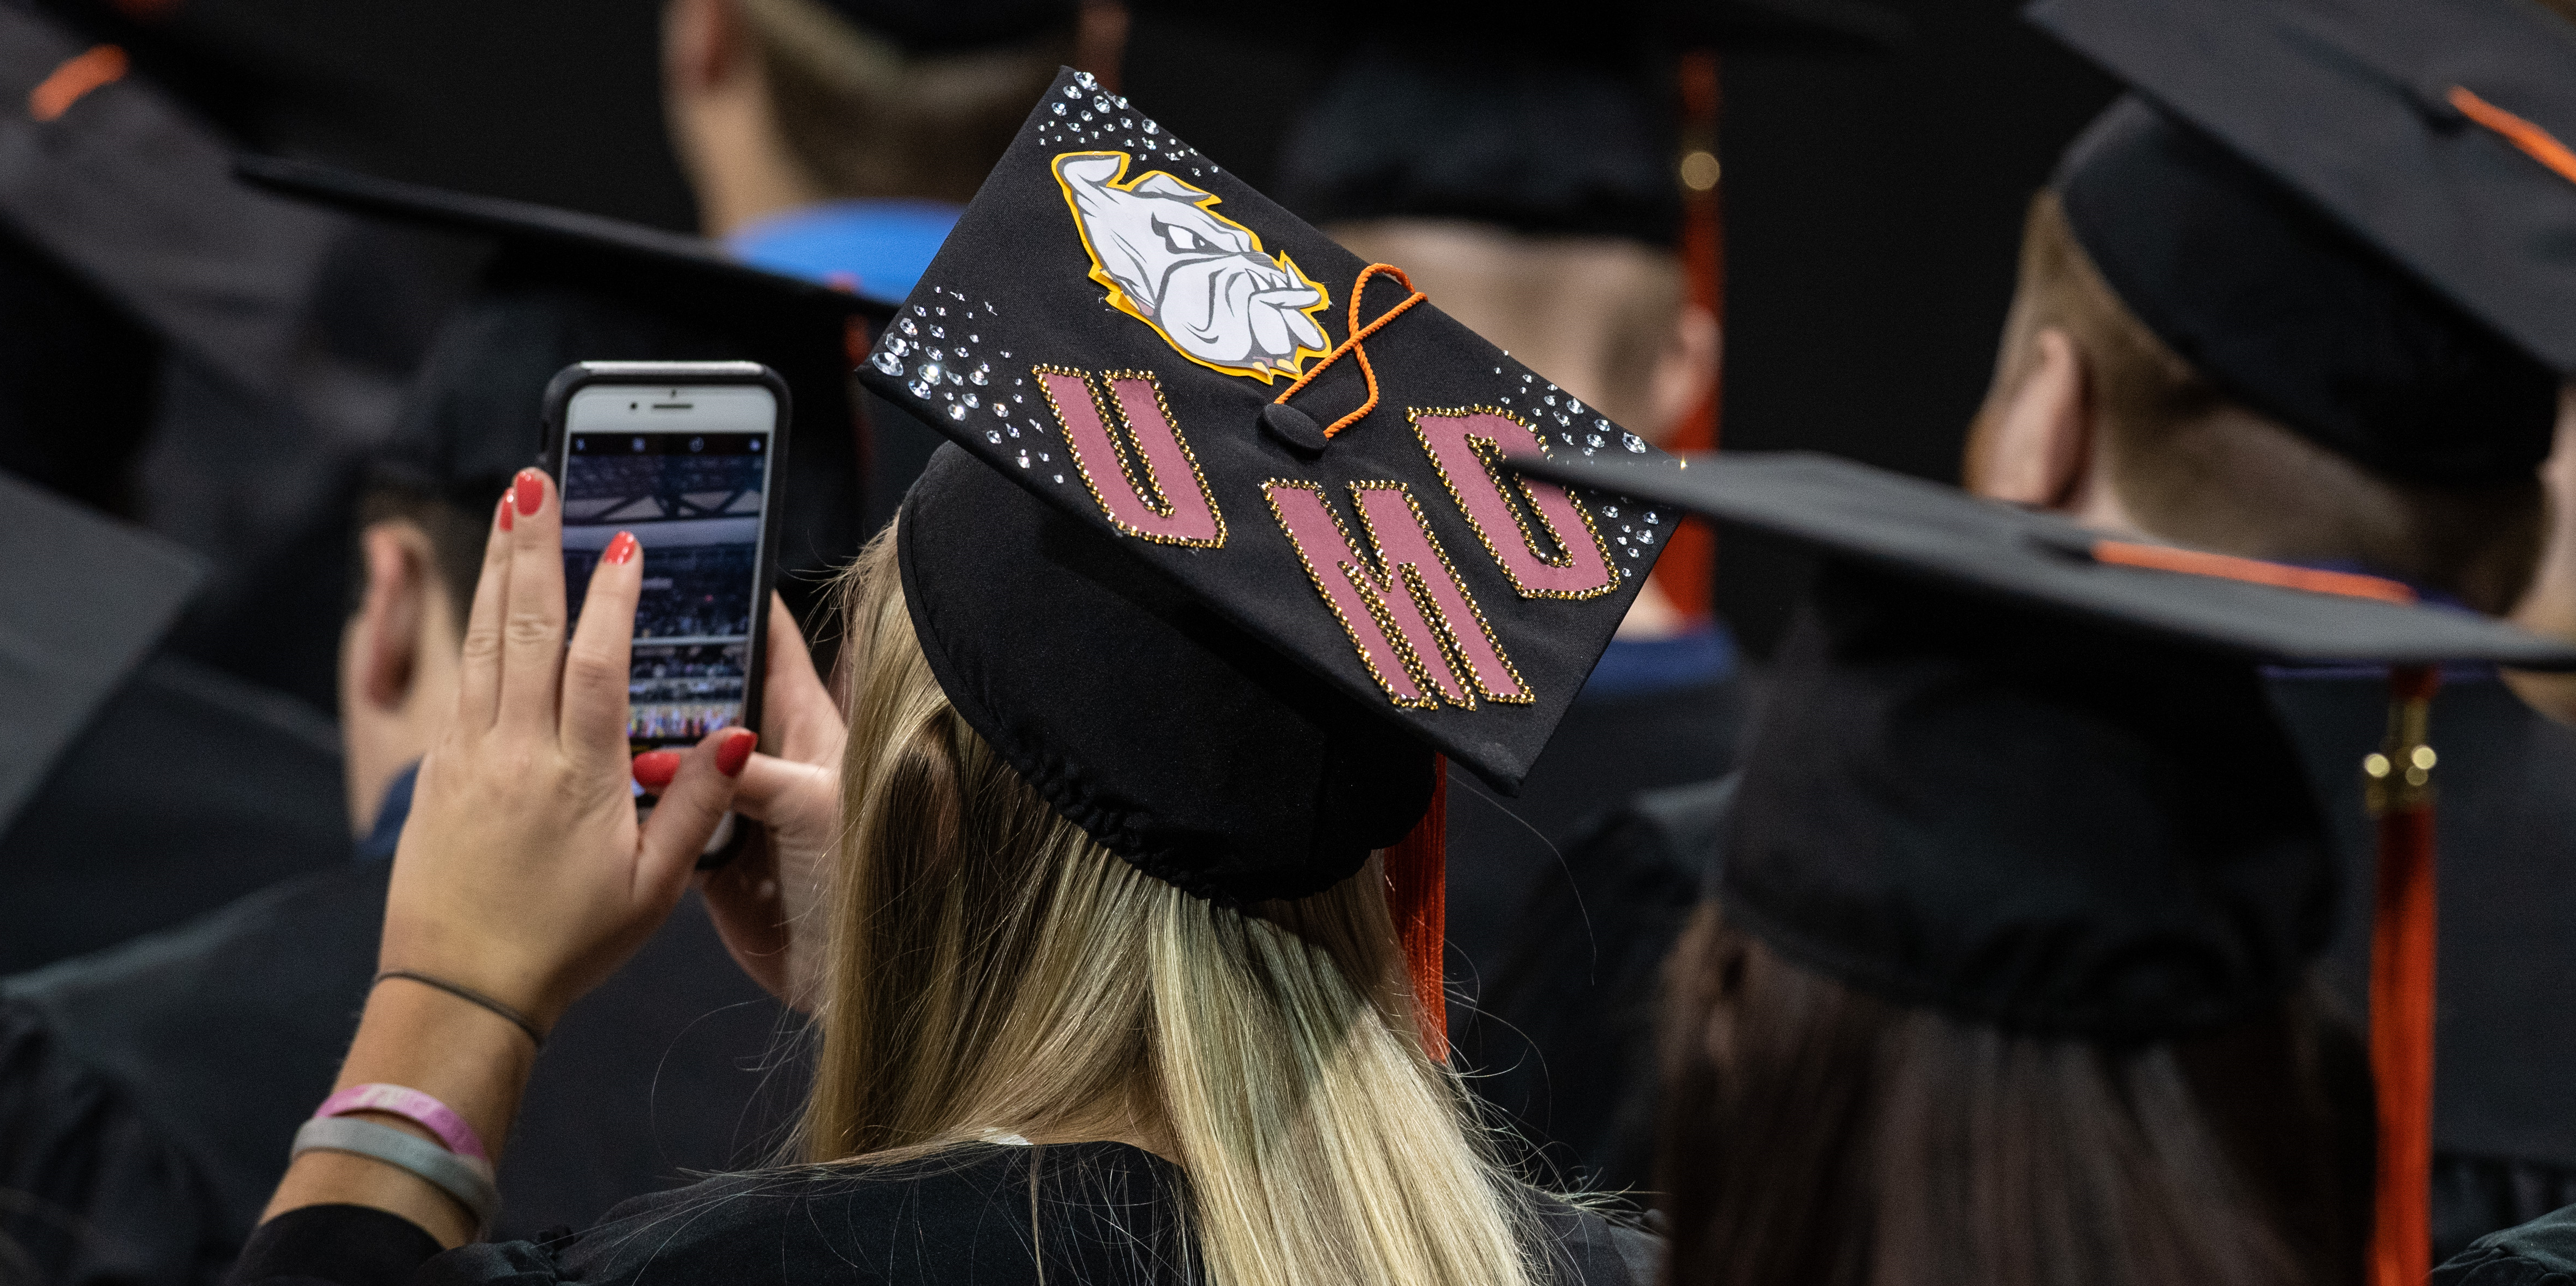 Student with UMD on their mortar board at commencement